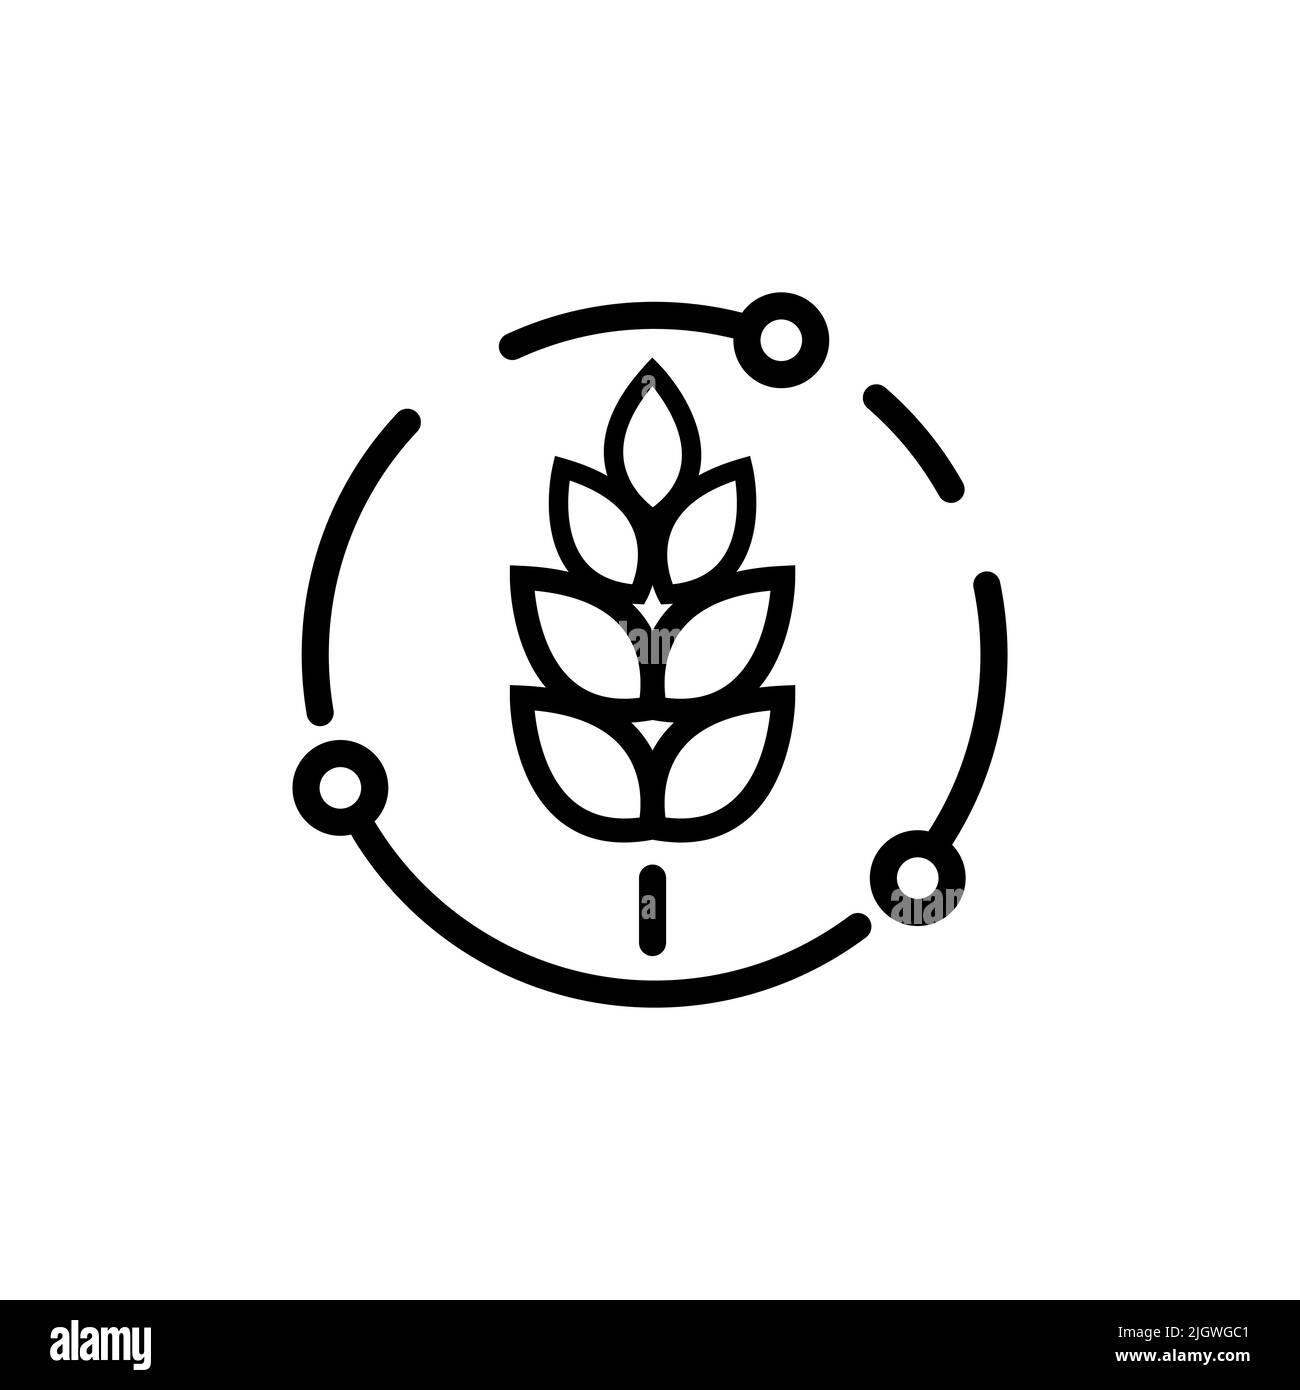 Simple oat growth design concept. Farm agriculture oat cycle sign Stock Vector